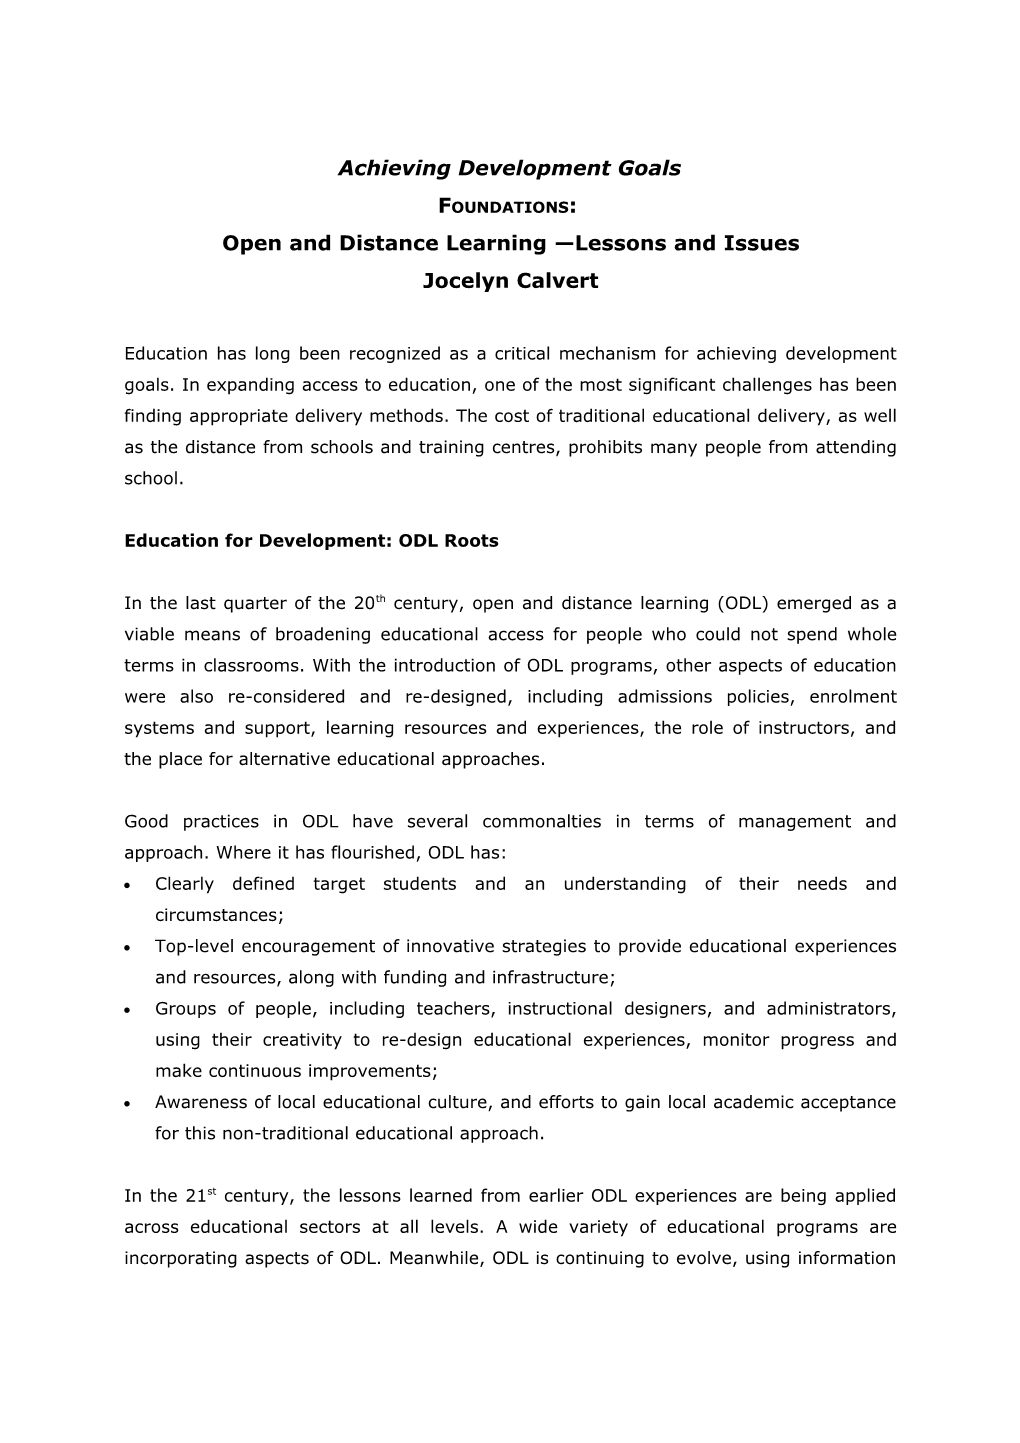 Open and Distance Learning Foundations: Lessons and Issues